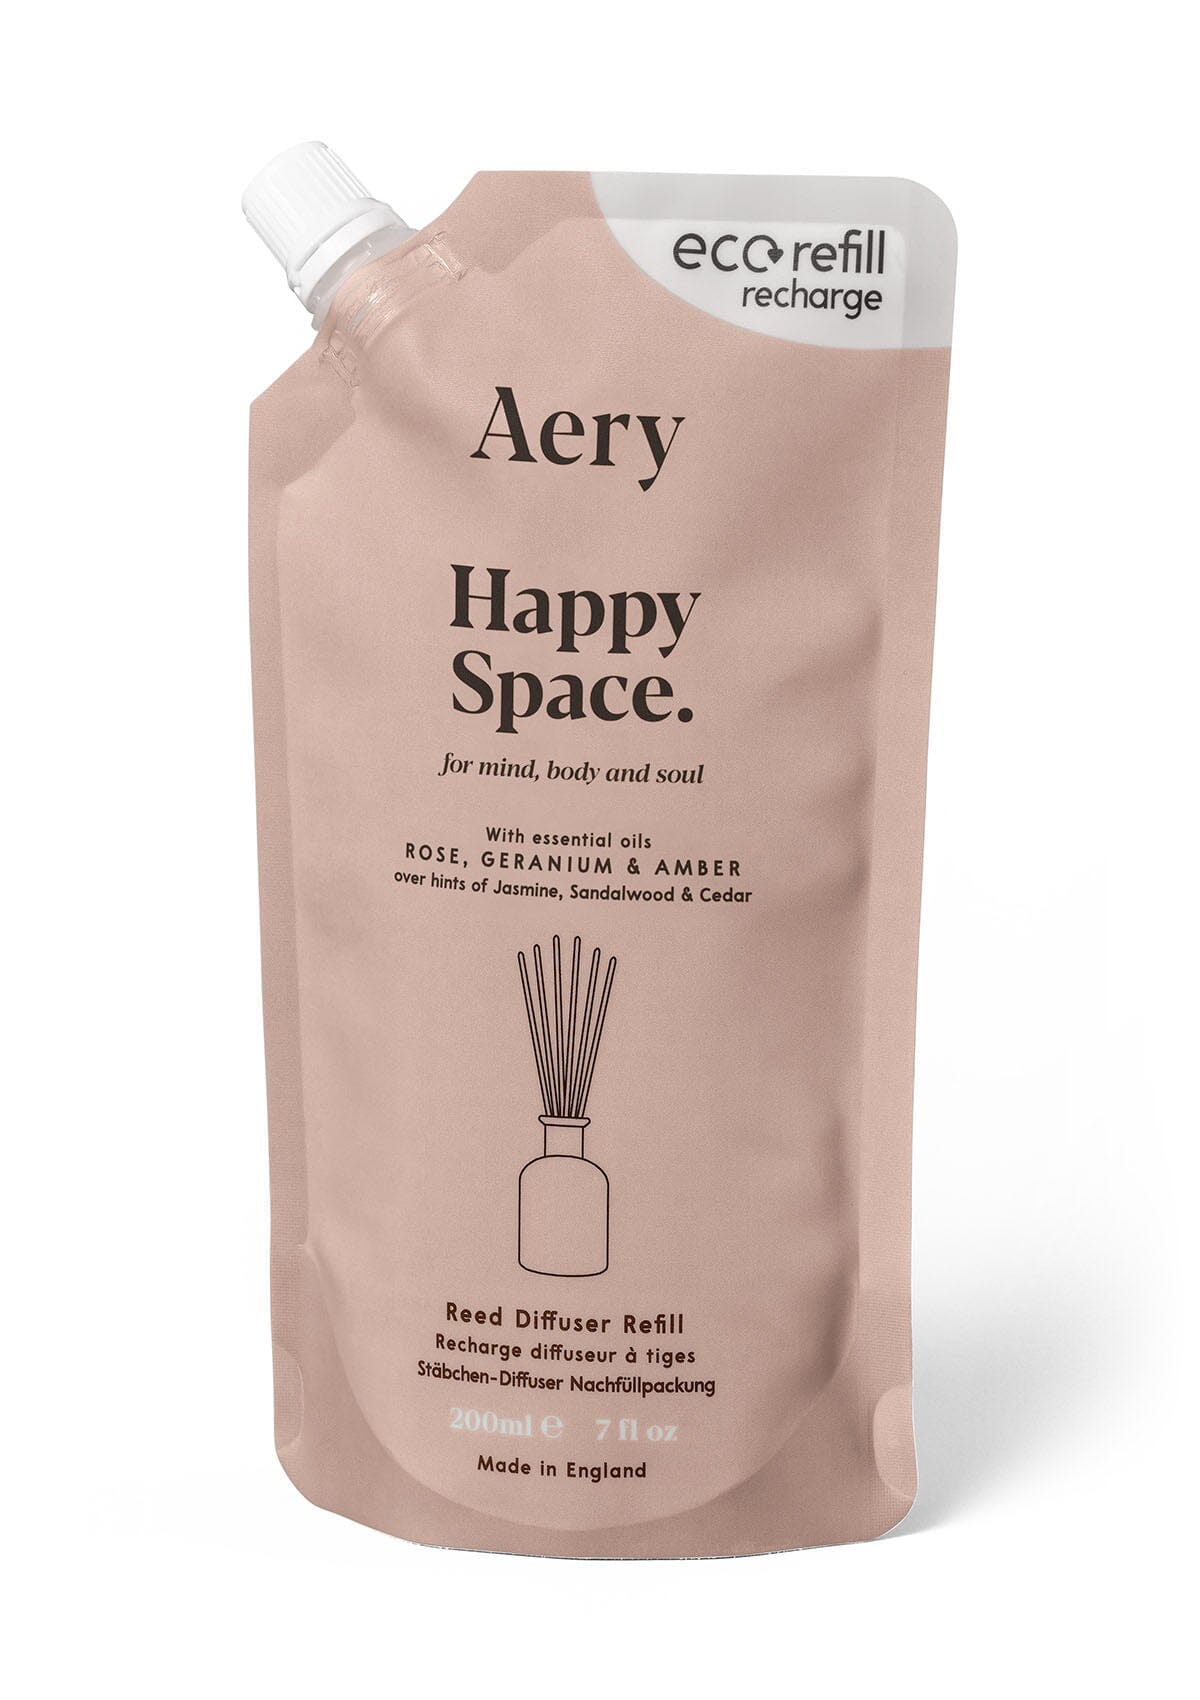 Happy Space reed diffuser refill pouch by aery displayed on white background 